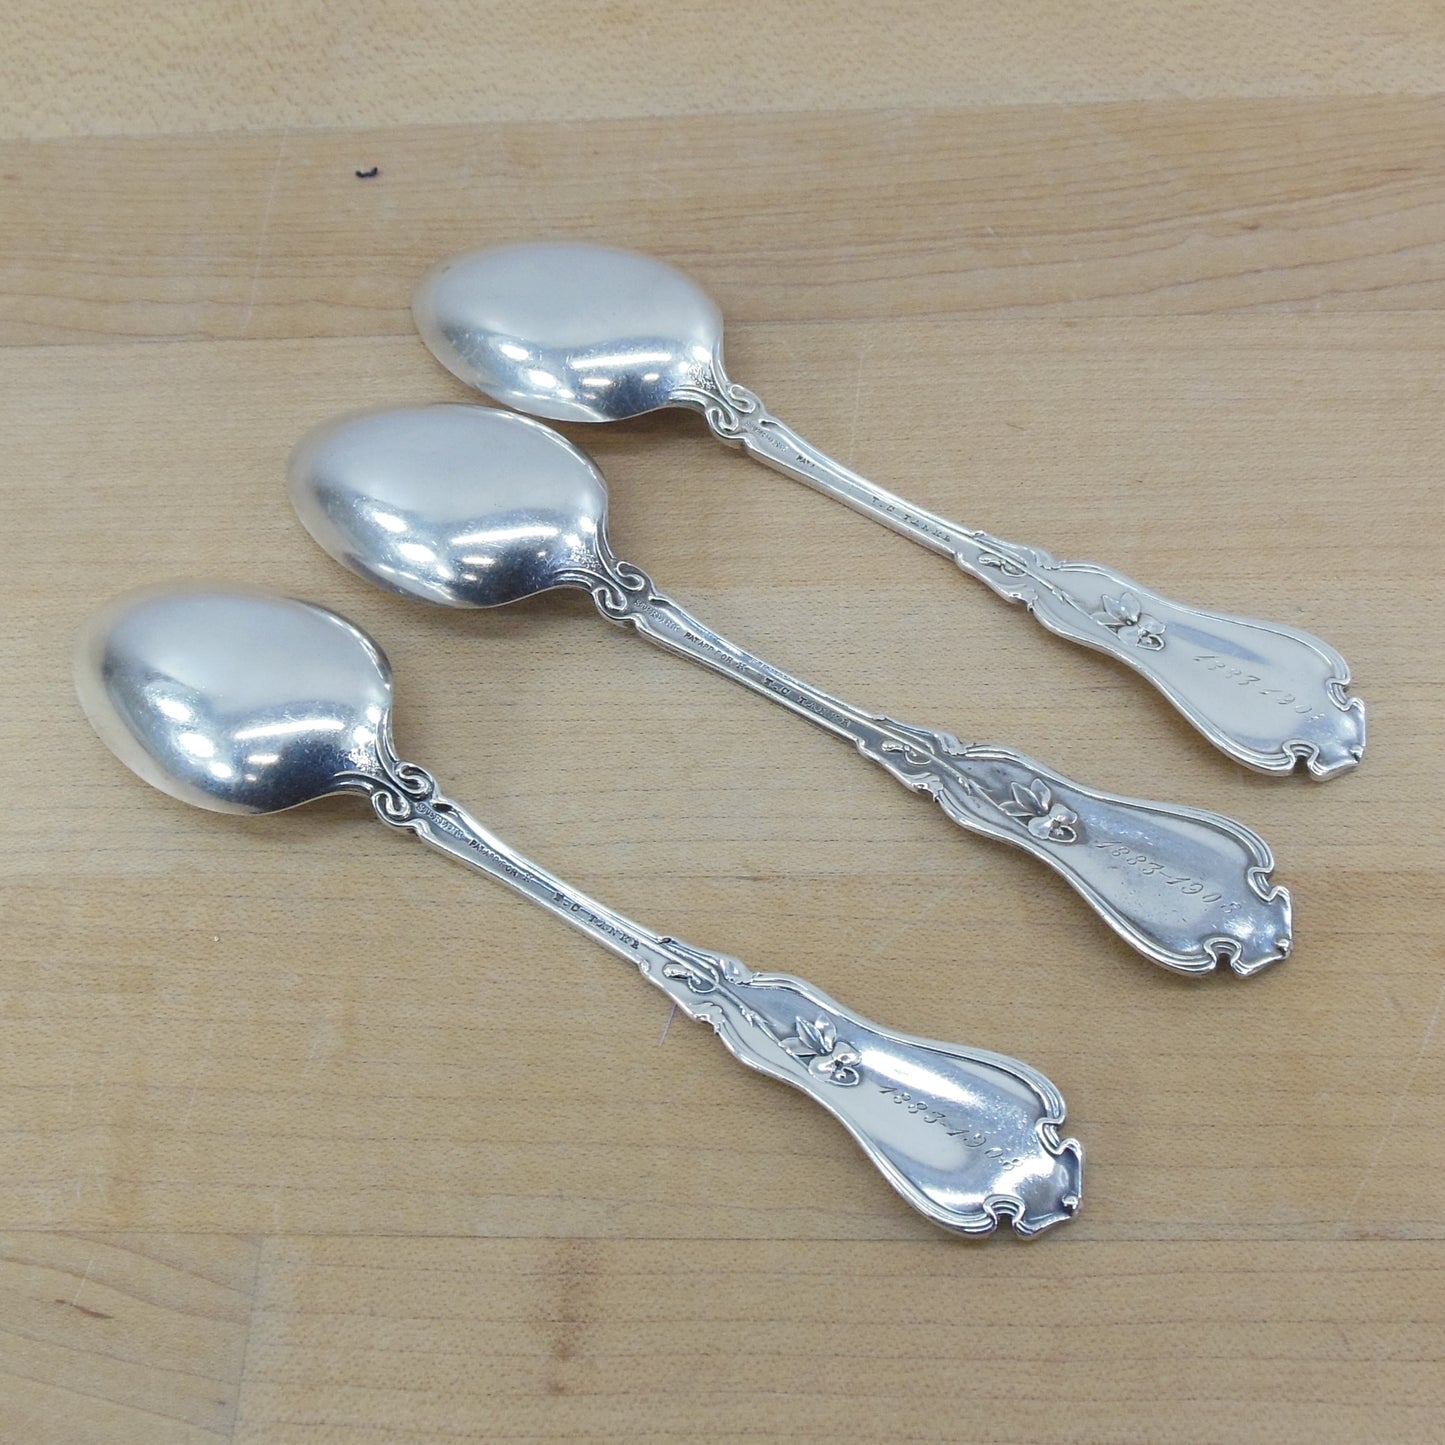 Whiting 1905 Violet Sterling Silver Teaspoon 3 Set - Mono S used